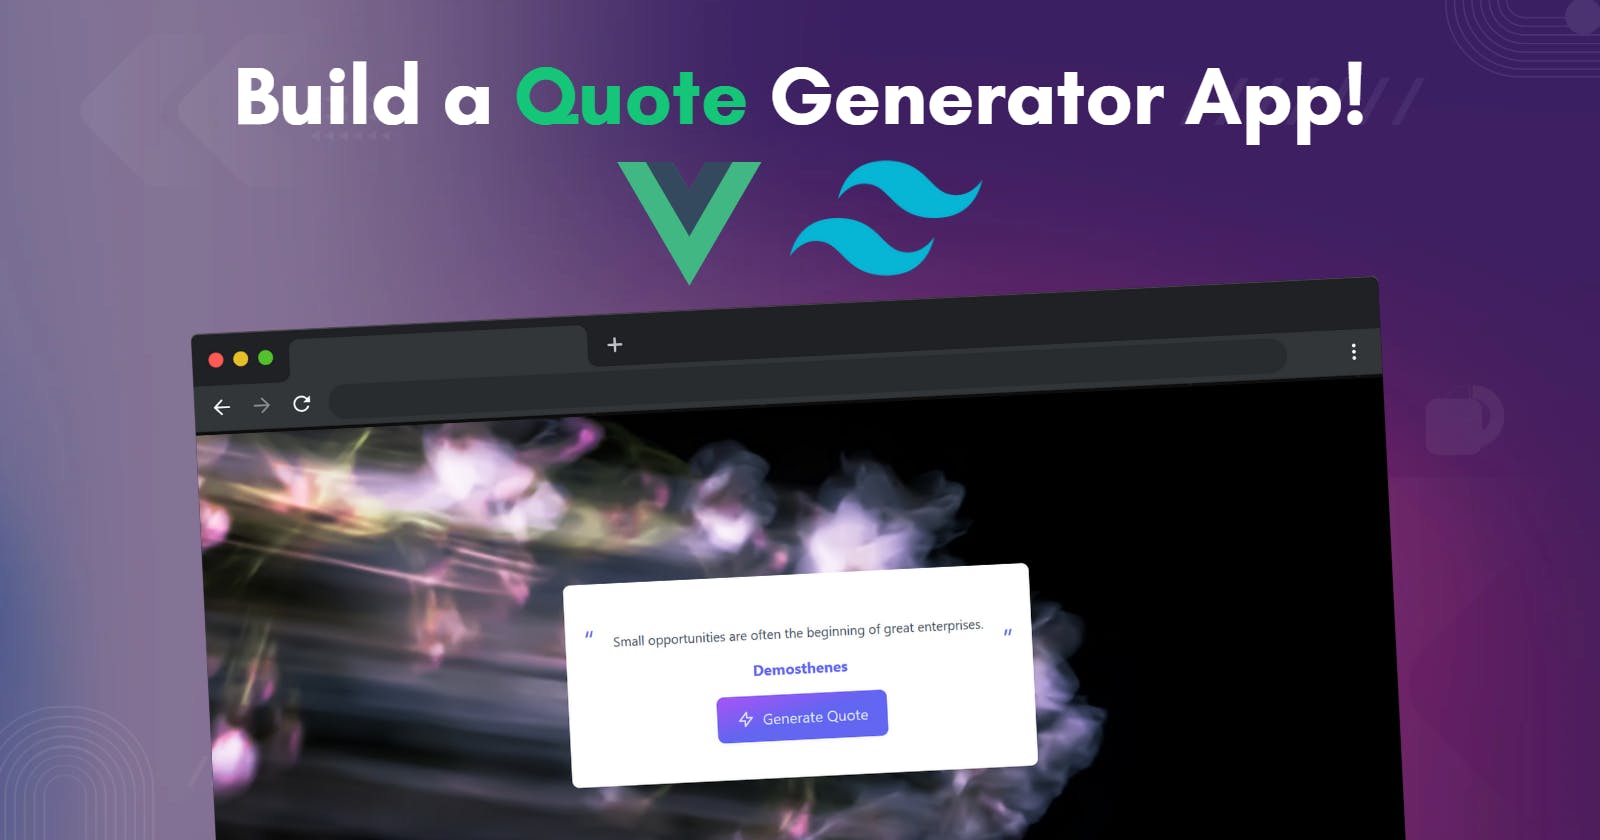 Building a Beautiful Quote Generator with Vue.js and Tailwind CSS